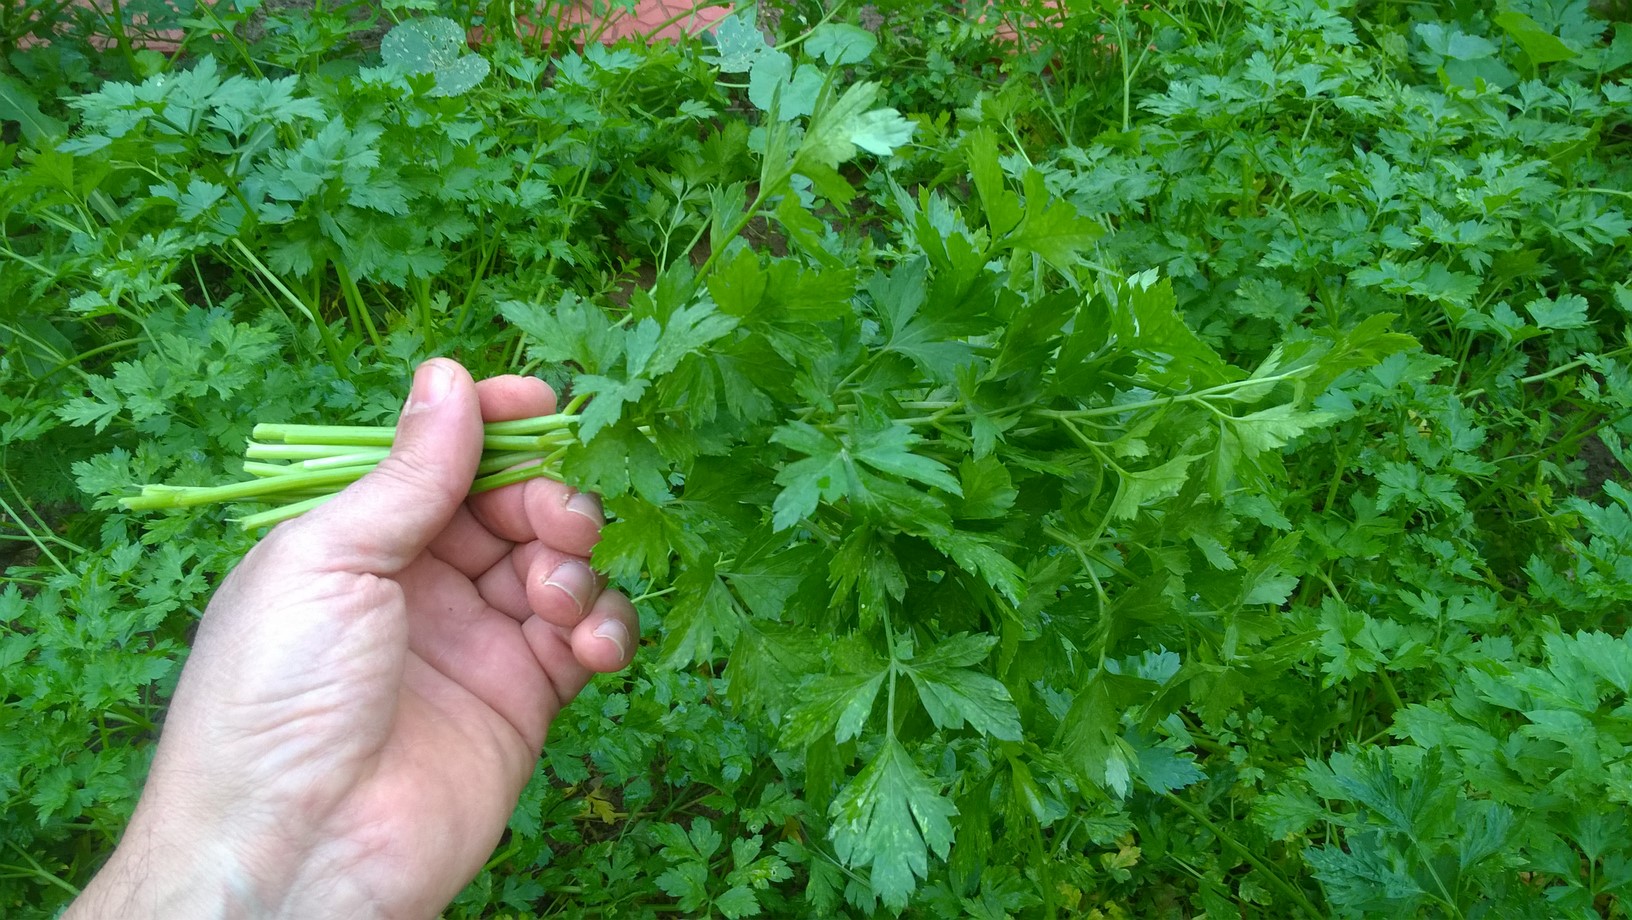 When the parsley sprouts out with sets of three leaves that are fully developed, it is ready to be picked.